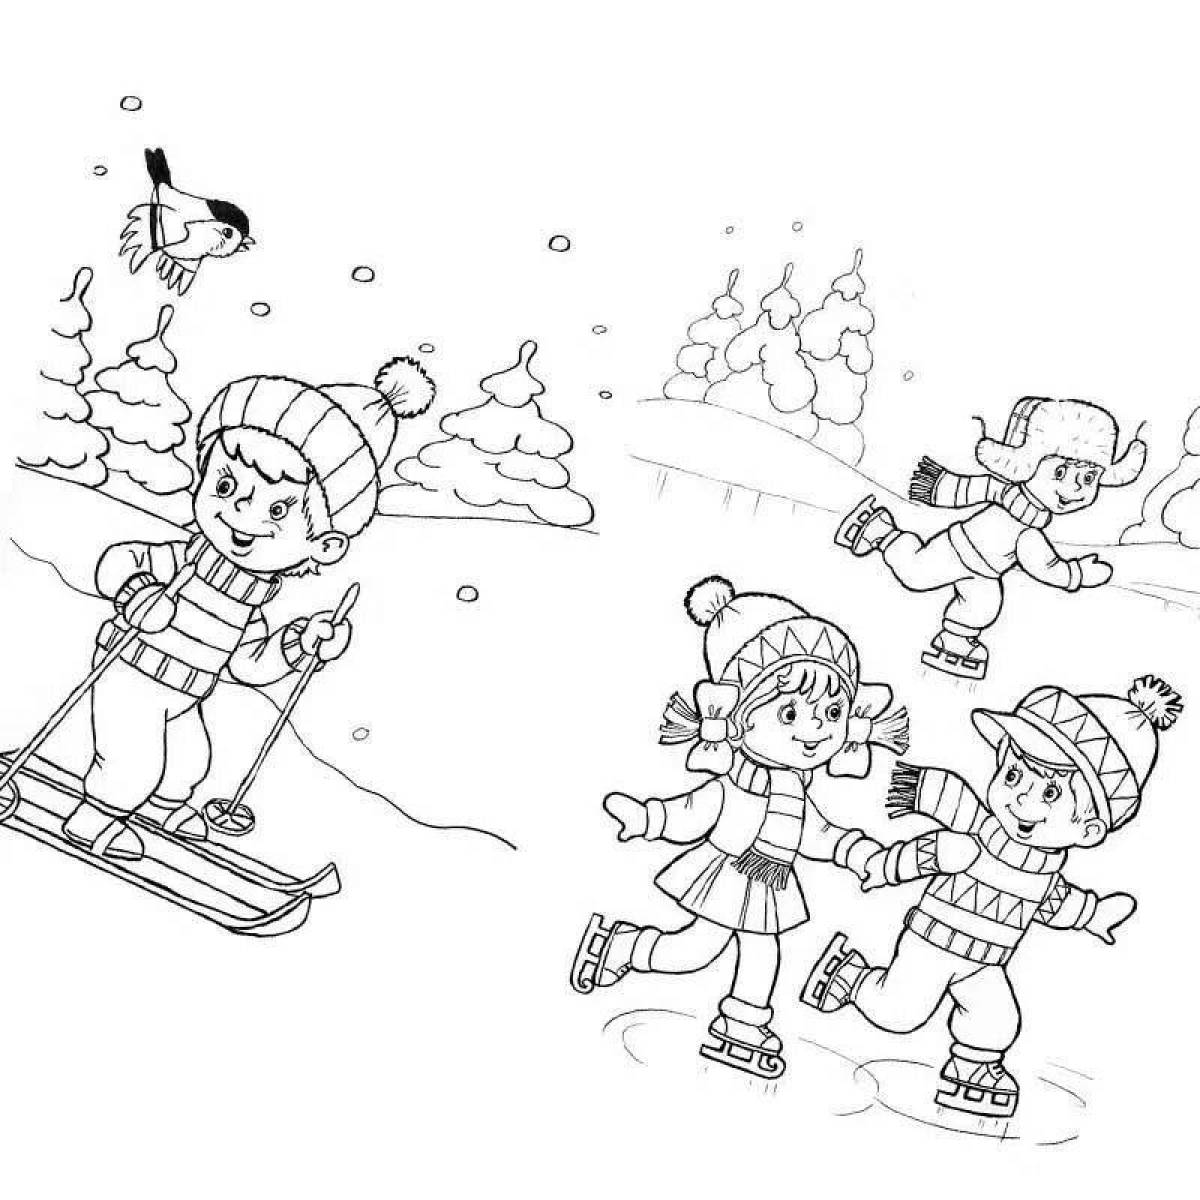 Colourful coloring book winter sports for children